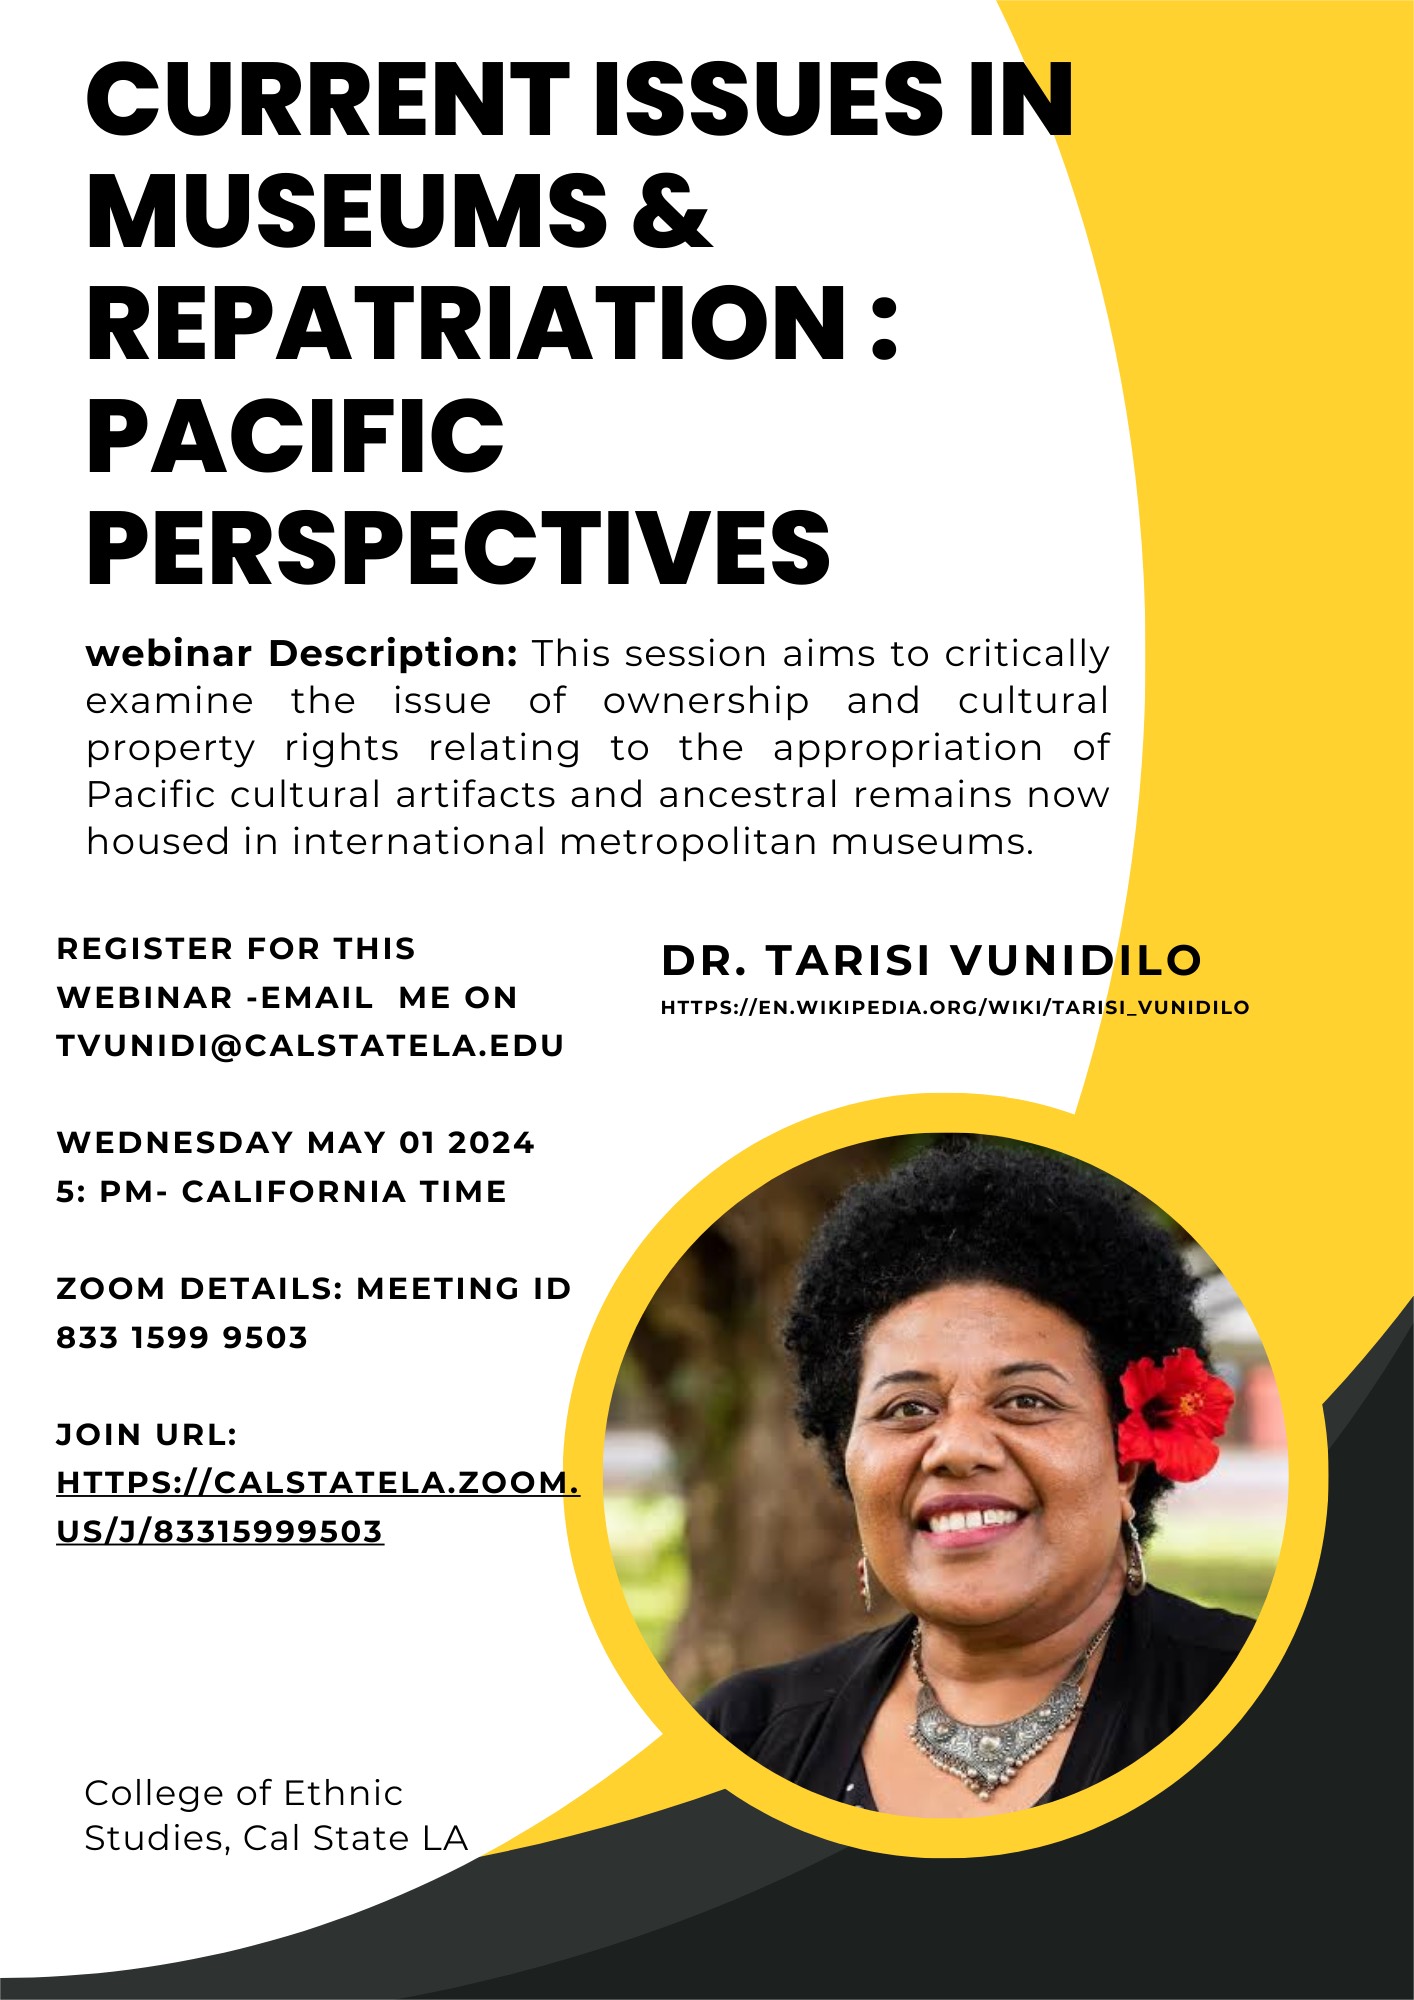 Flyer for webinar - Current Issues in Museums & Repatriation: Pacific Perspectives